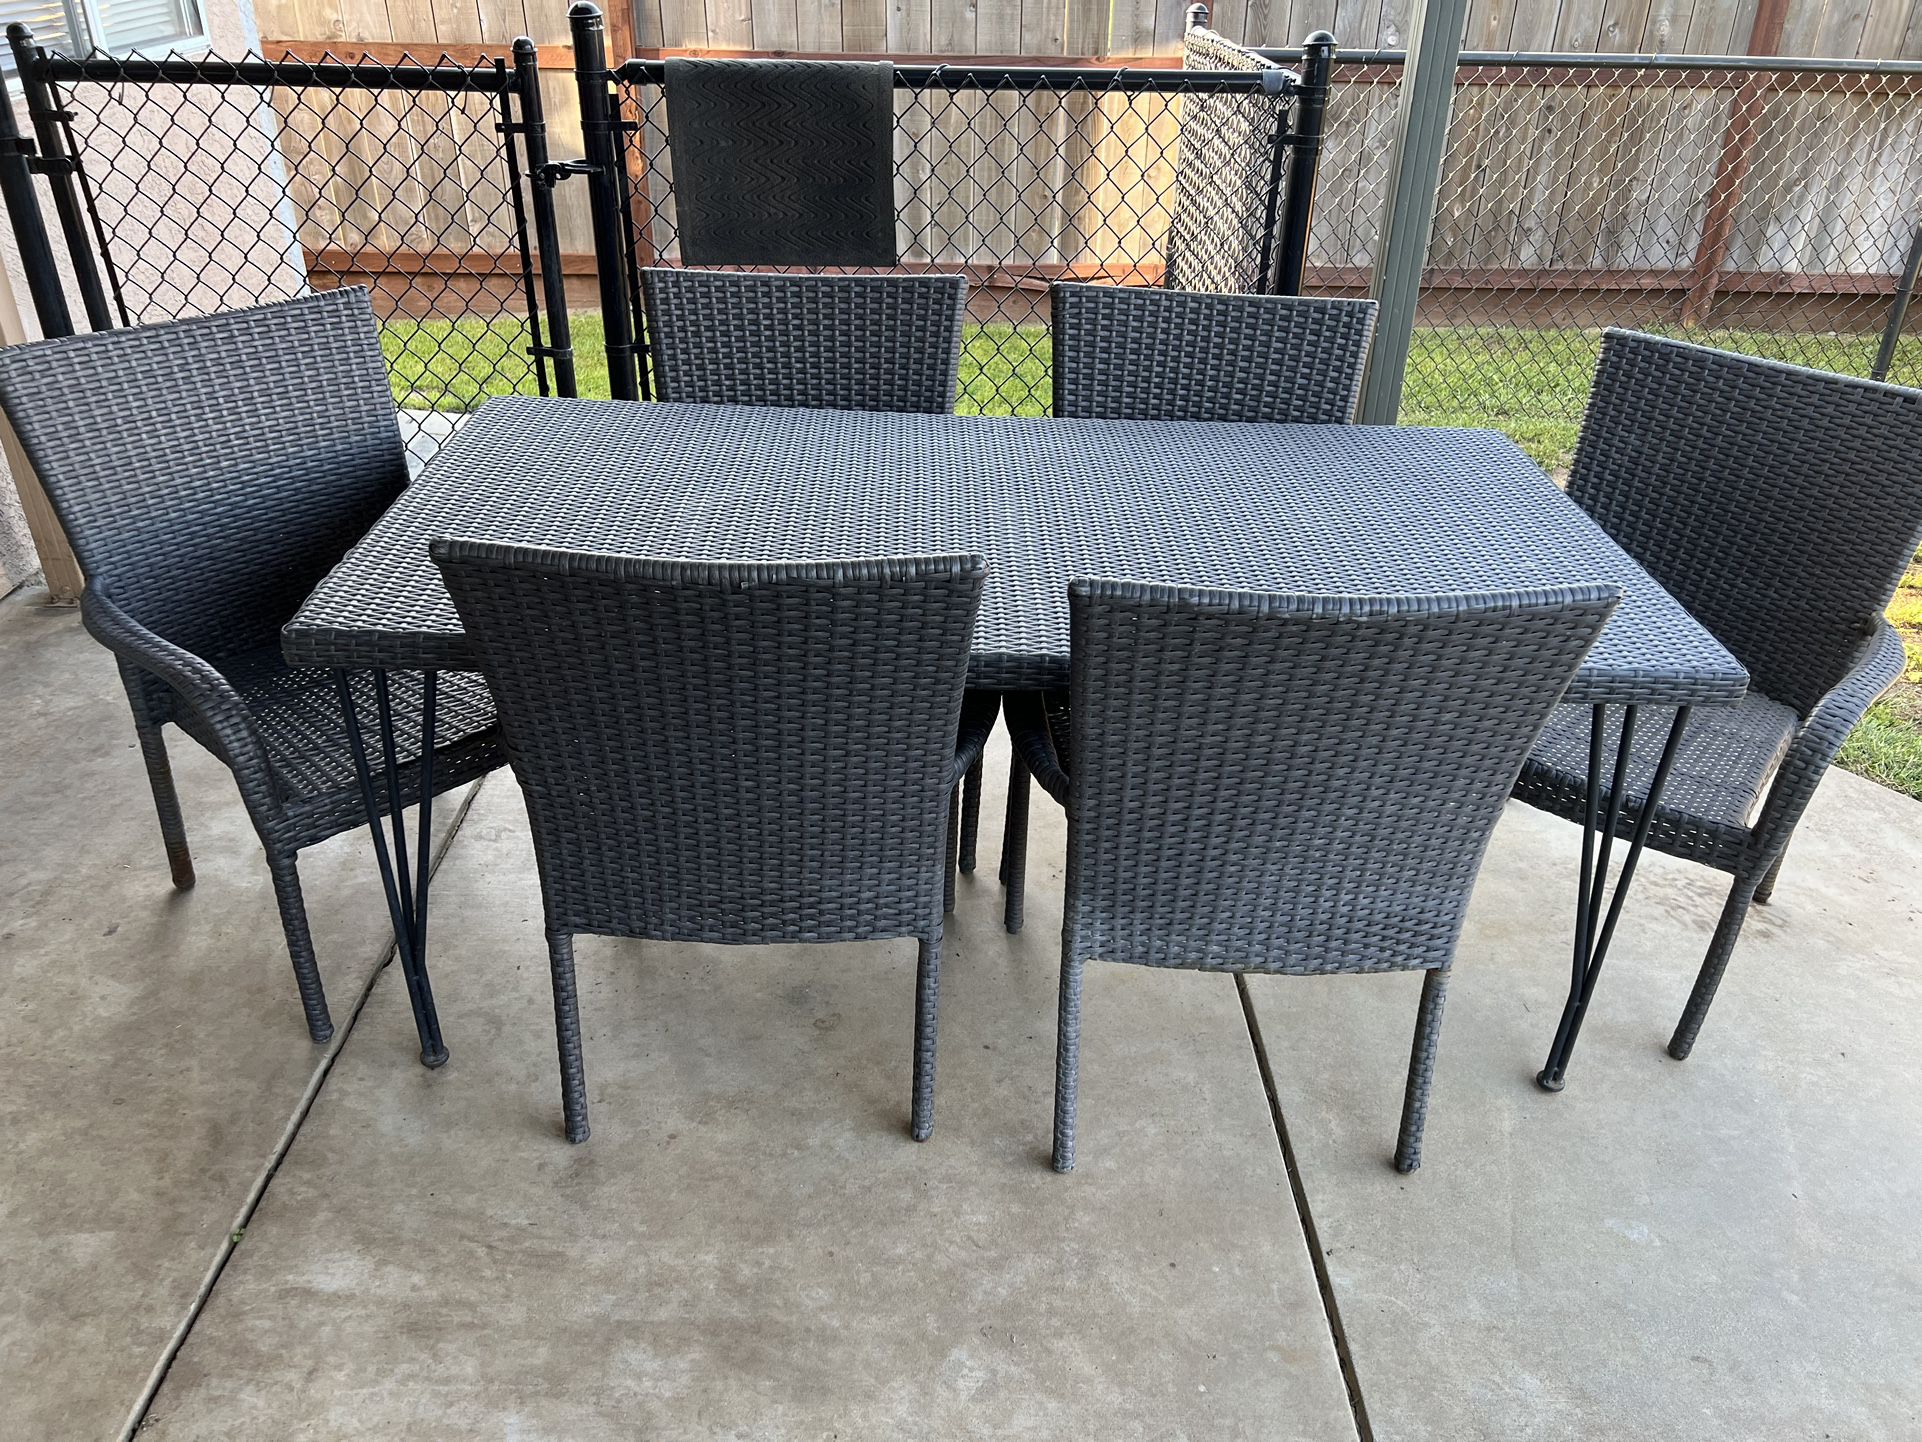 Home Depot Patio Table Set With 6 Chairs 